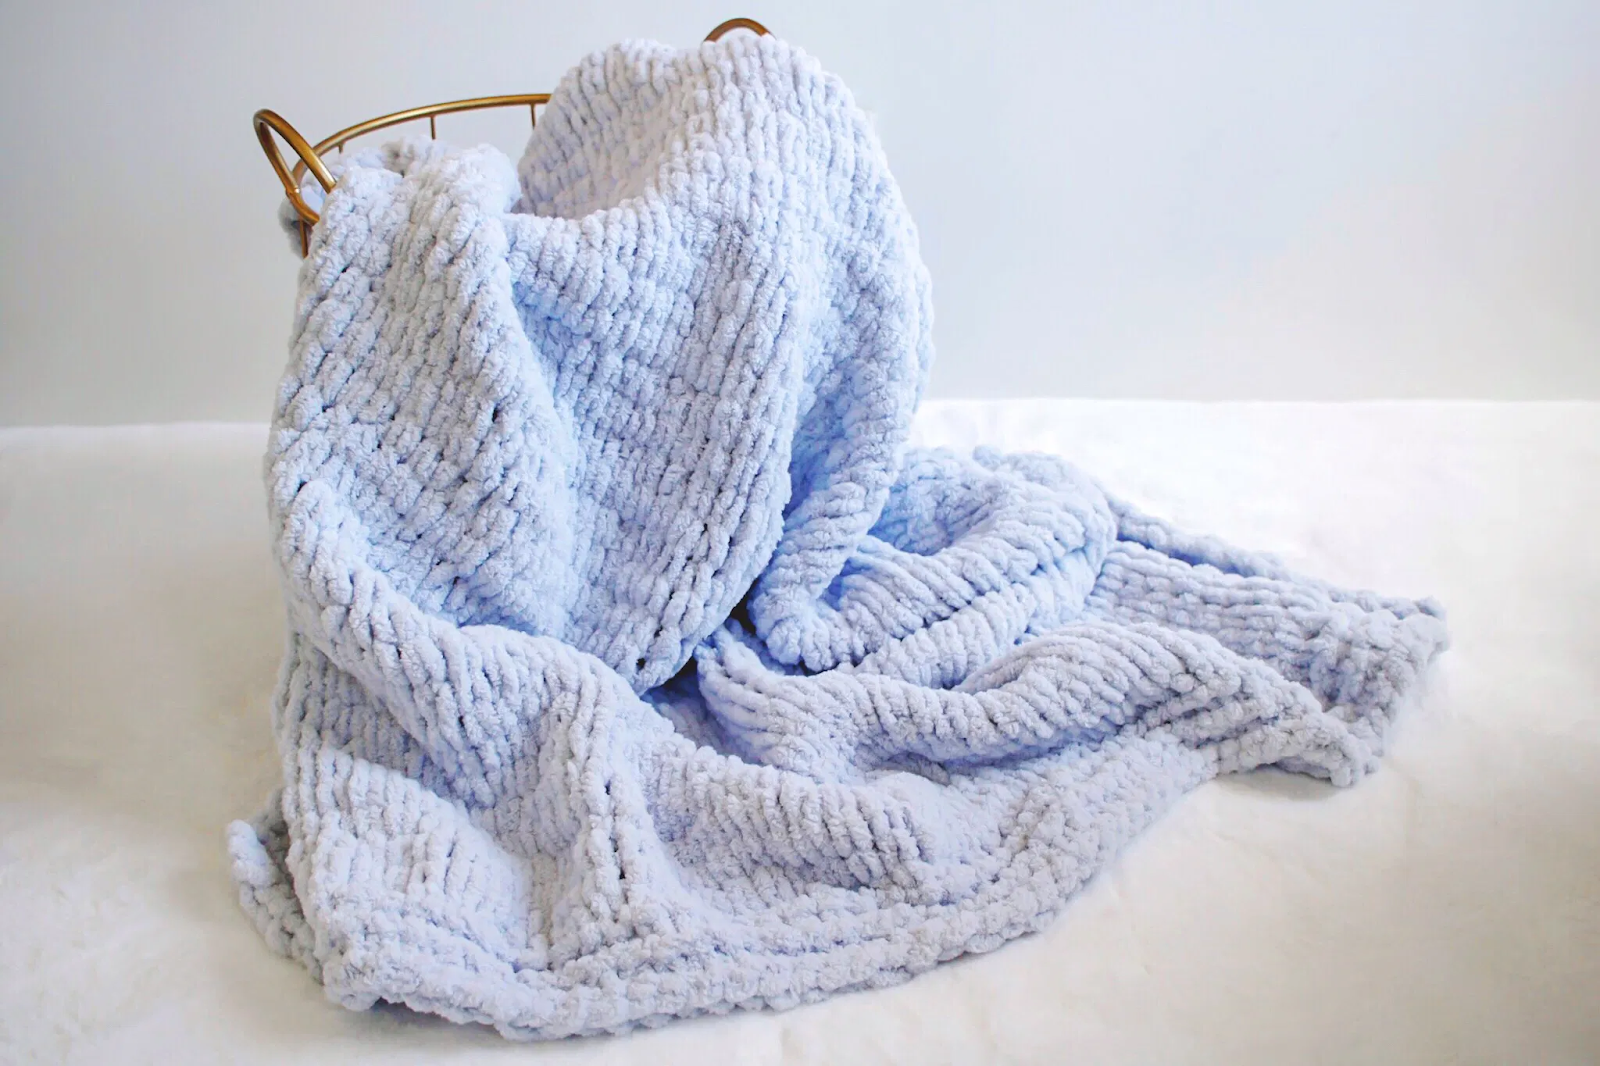 How to Finger Knit a Baby Blanket